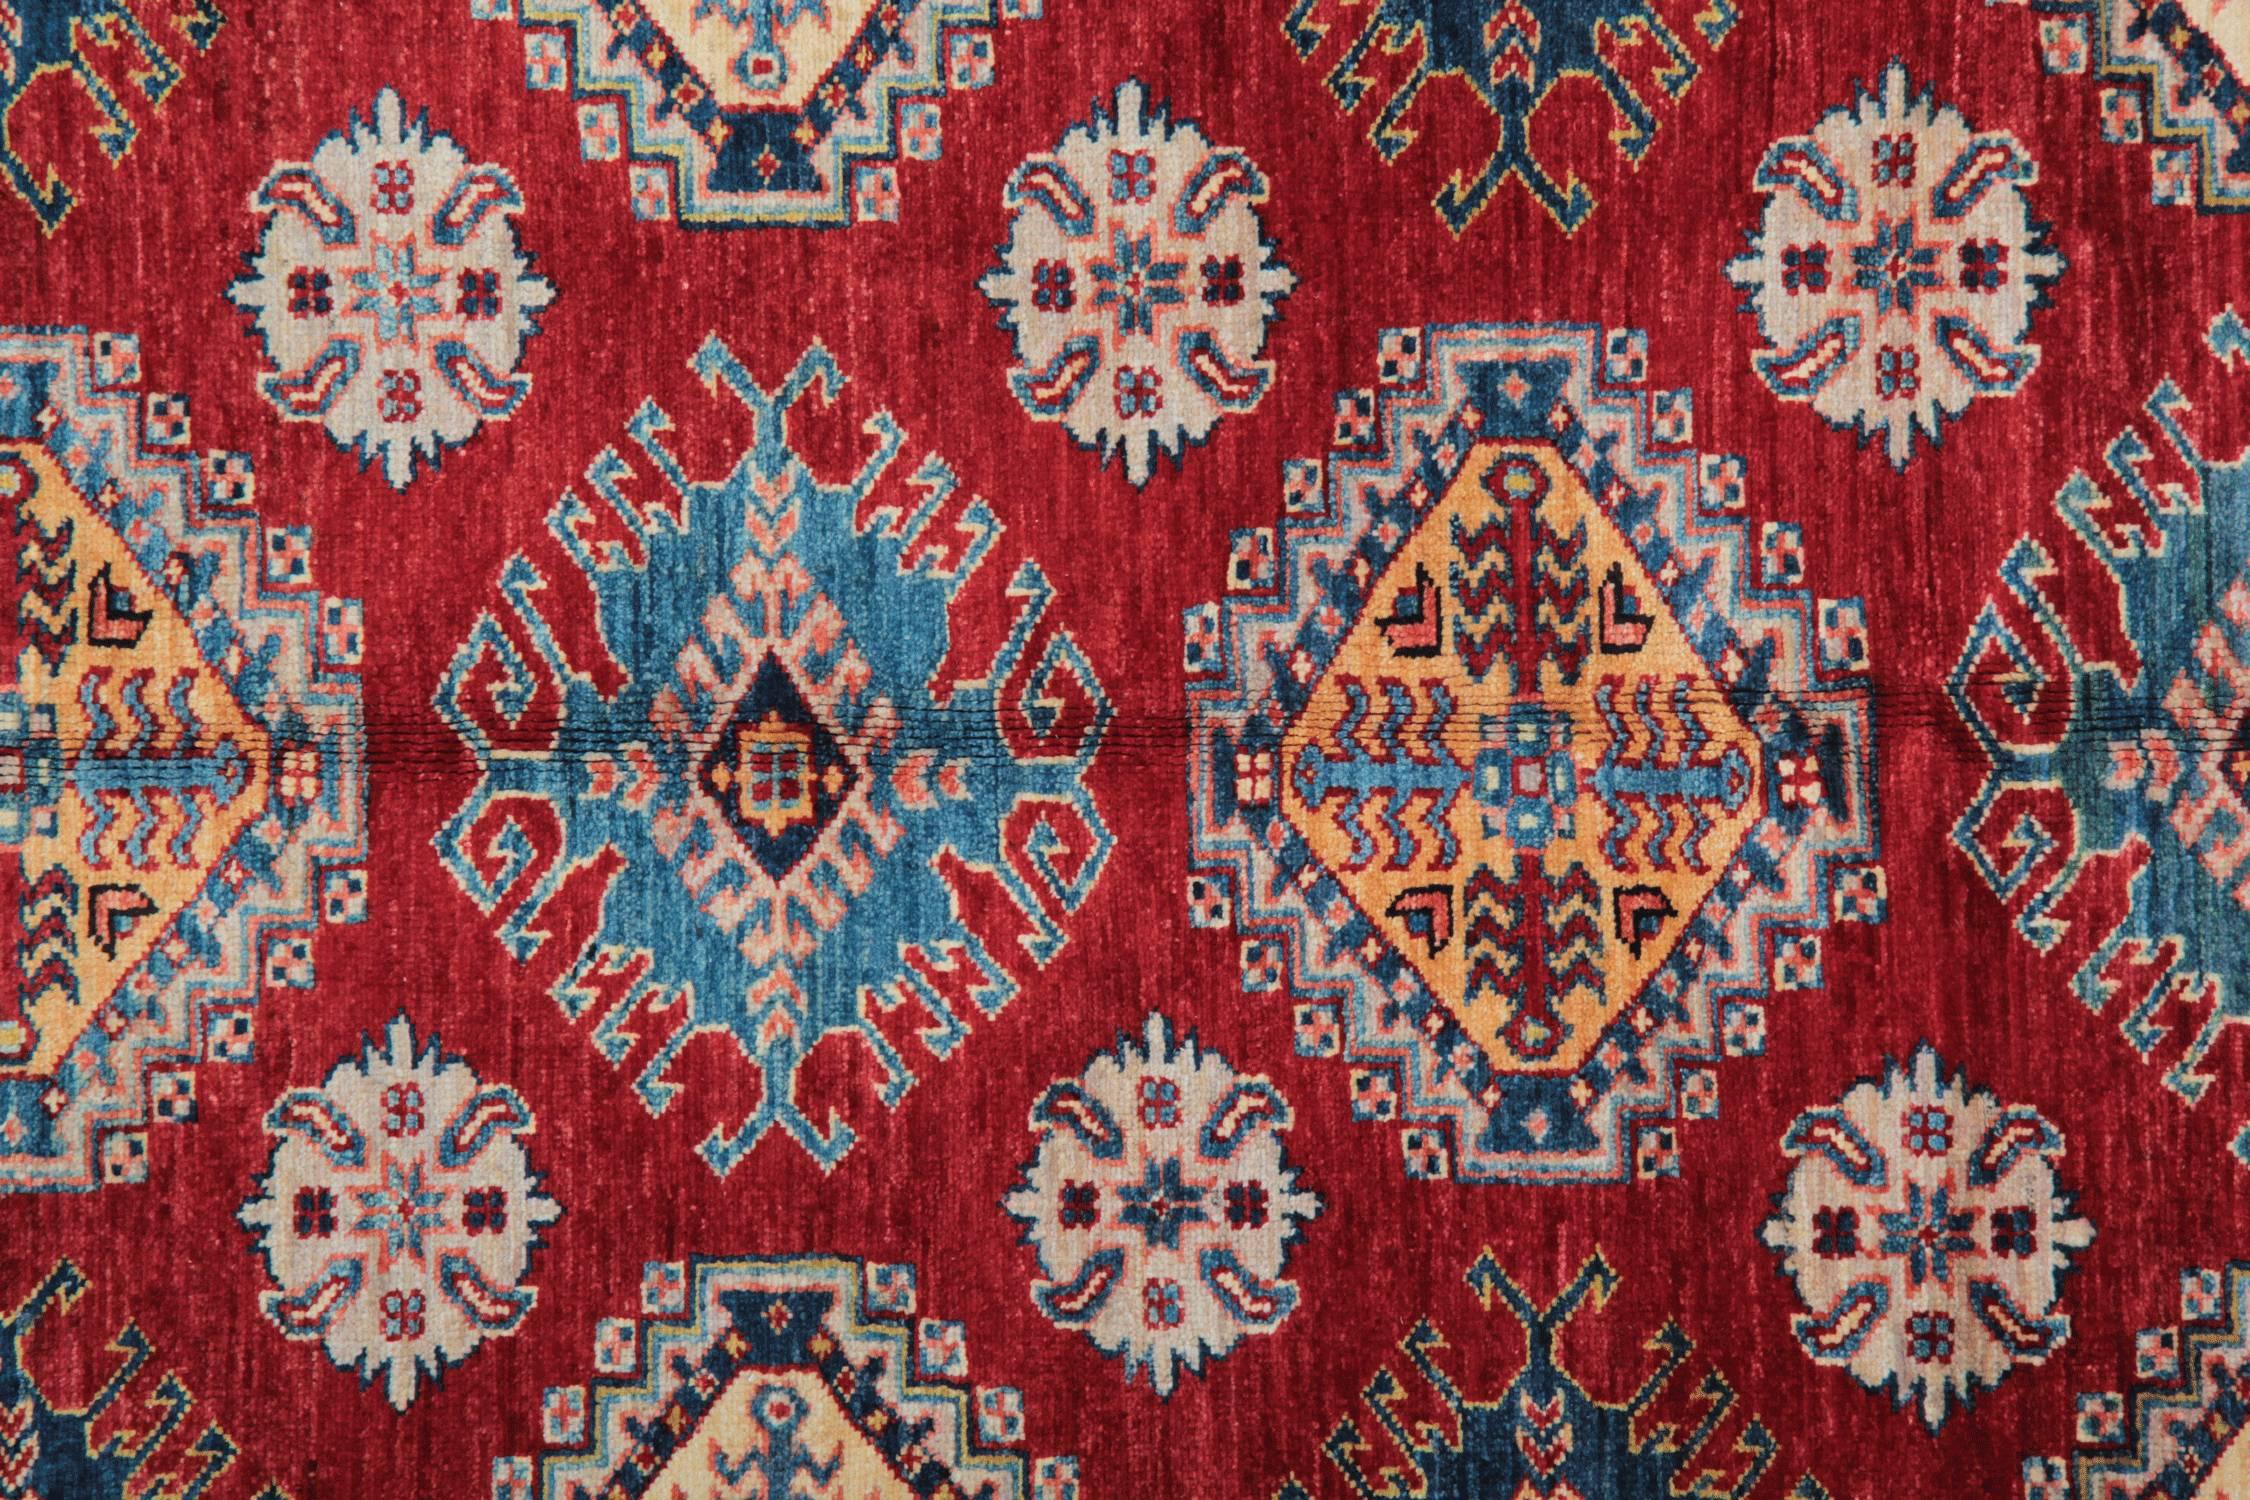 Contemporary Persian Style Rugs, Afghan Rugs, Kazak Rugs, Carpet from Afghanistan